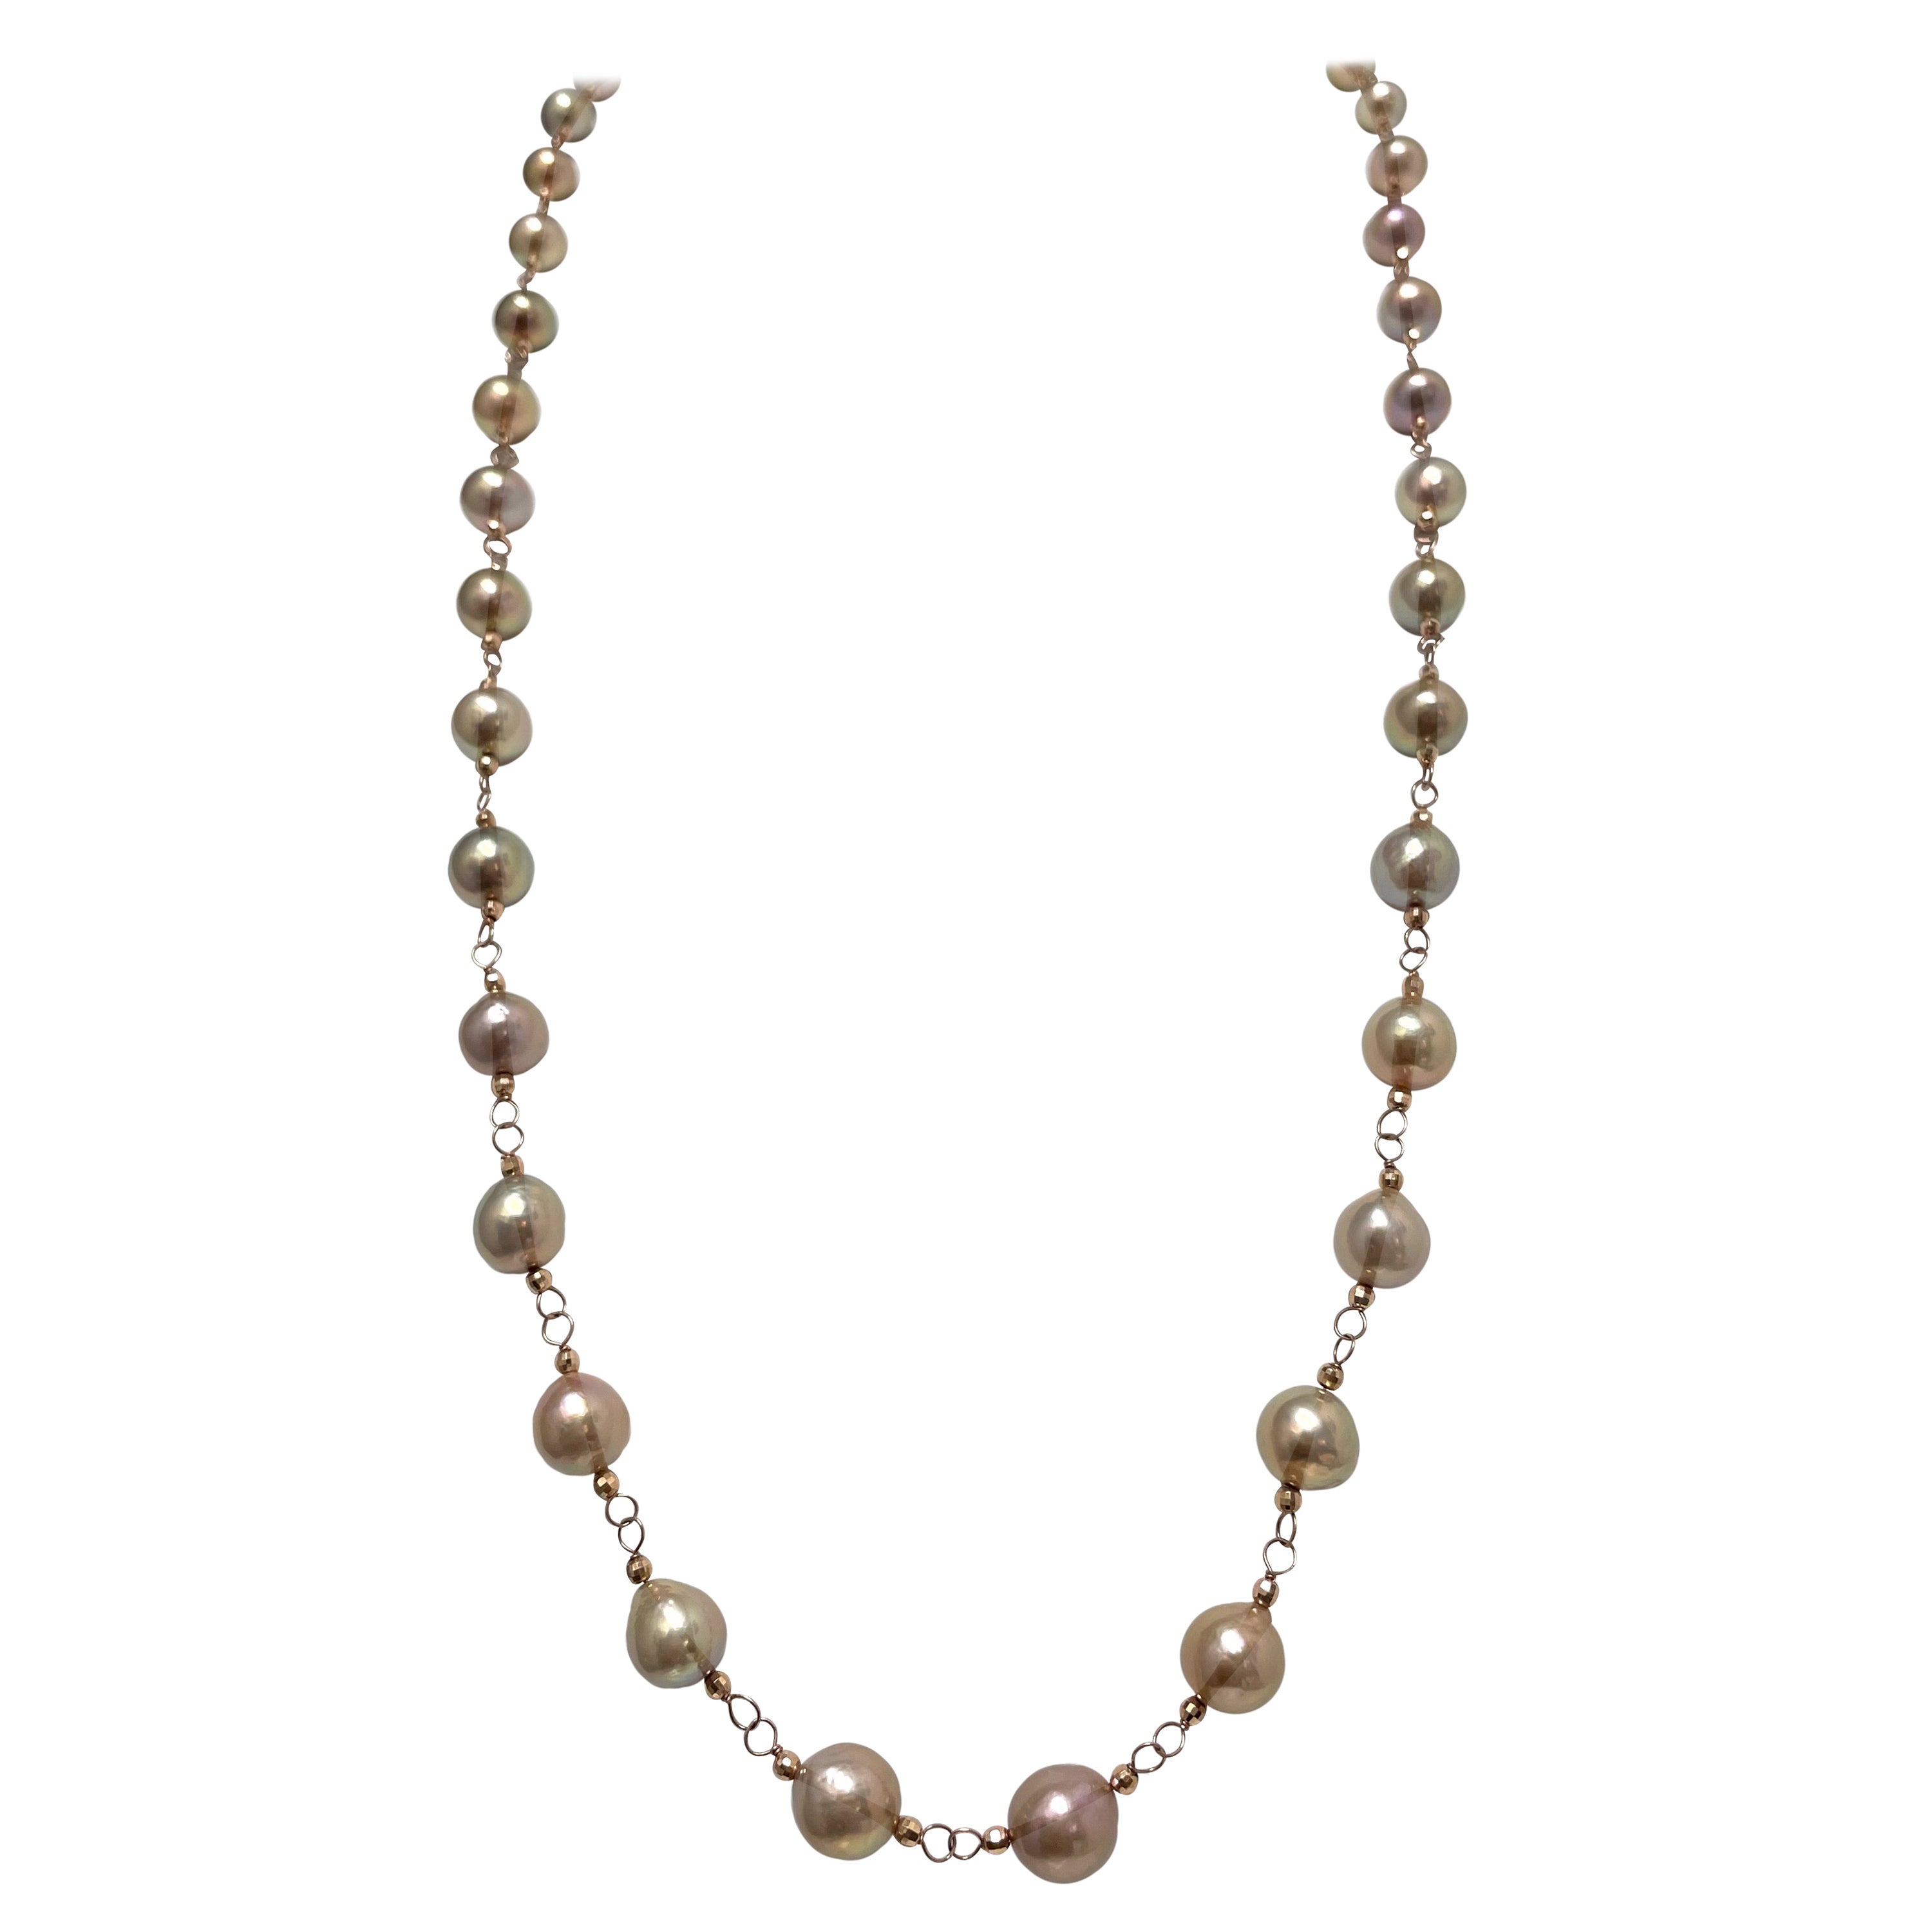 Lustrous Rare Tea Rose Freshwater Pearl Necklace